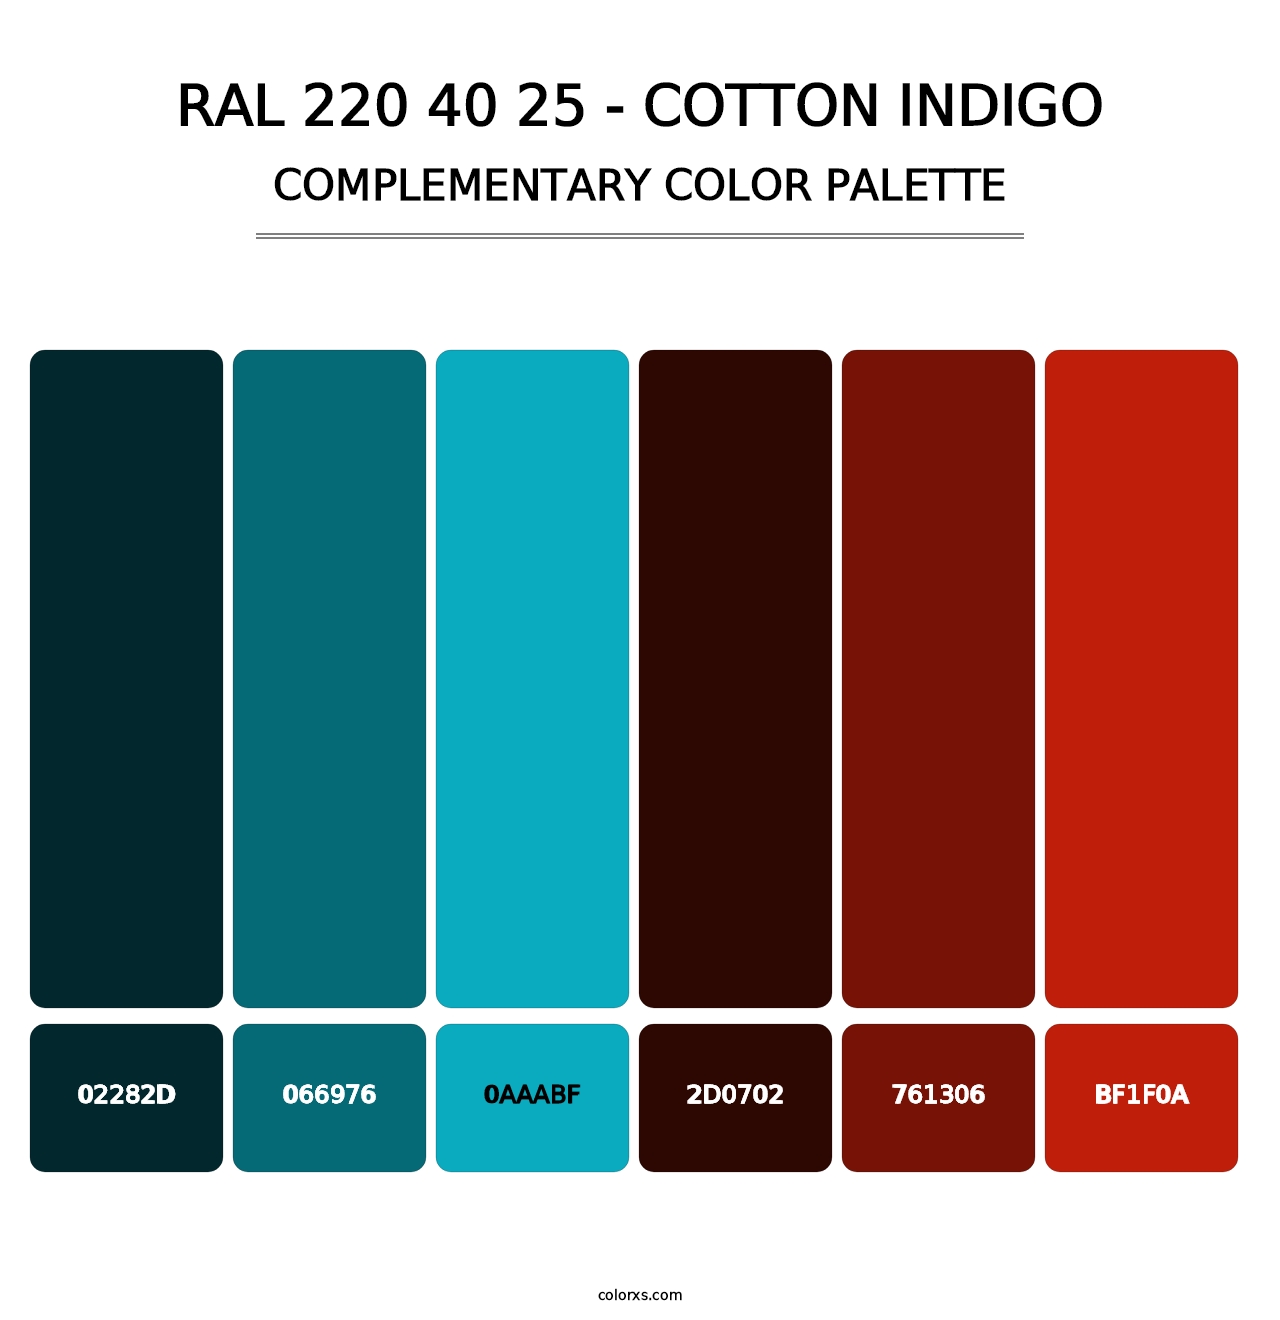 RAL 220 40 25 - Cotton Indigo - Complementary Color Palette